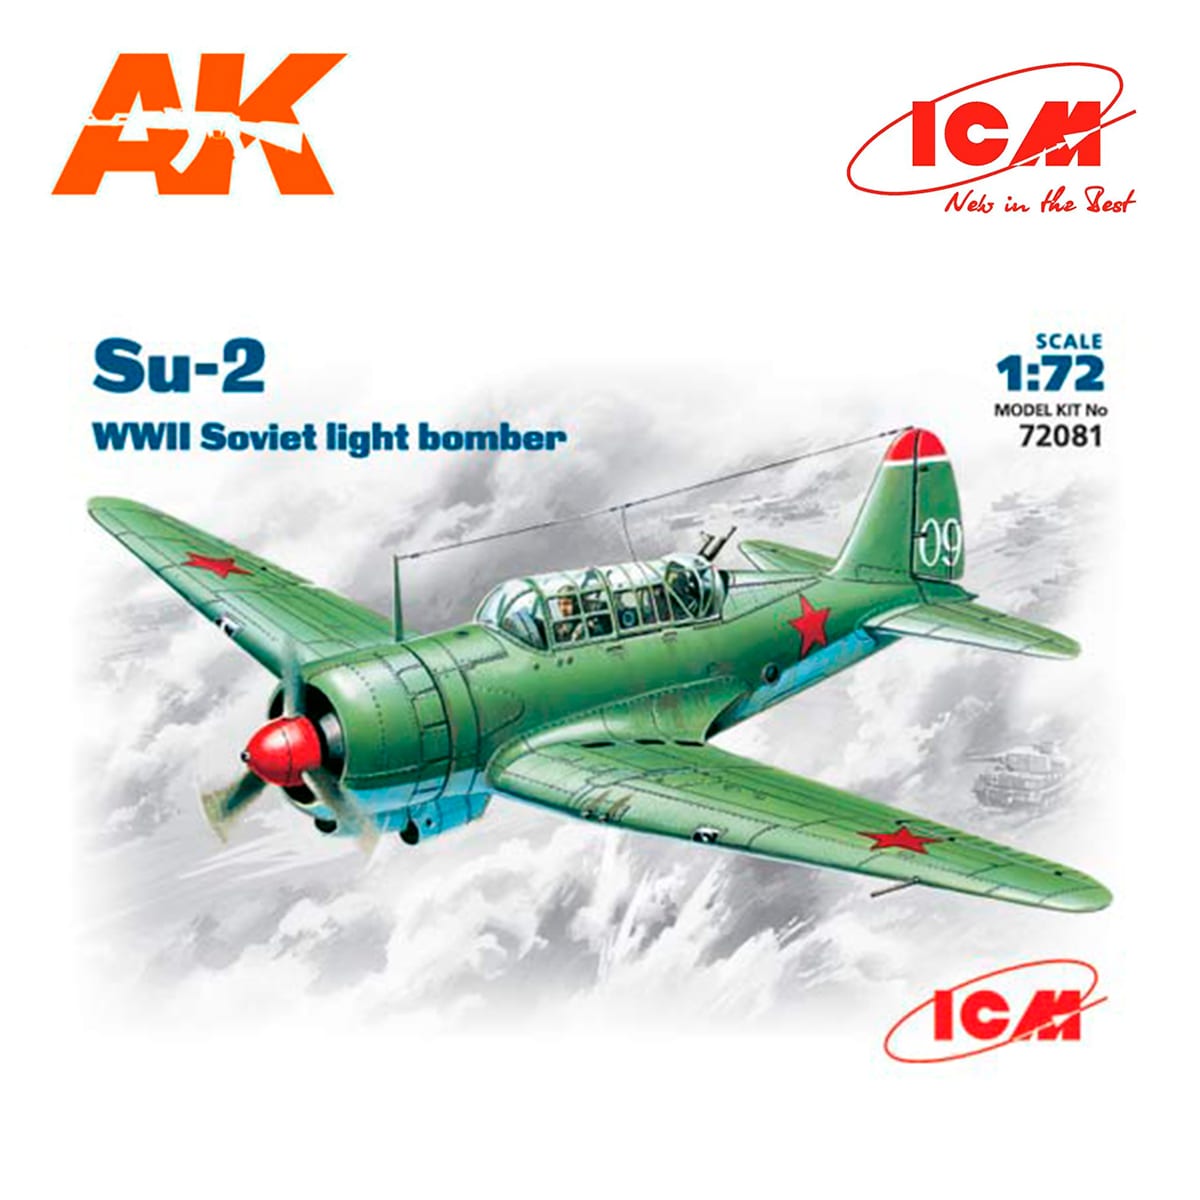 87 series Soviet dive bomber with system FT 1:72 scale Details about   Pe-2 << UM #105 